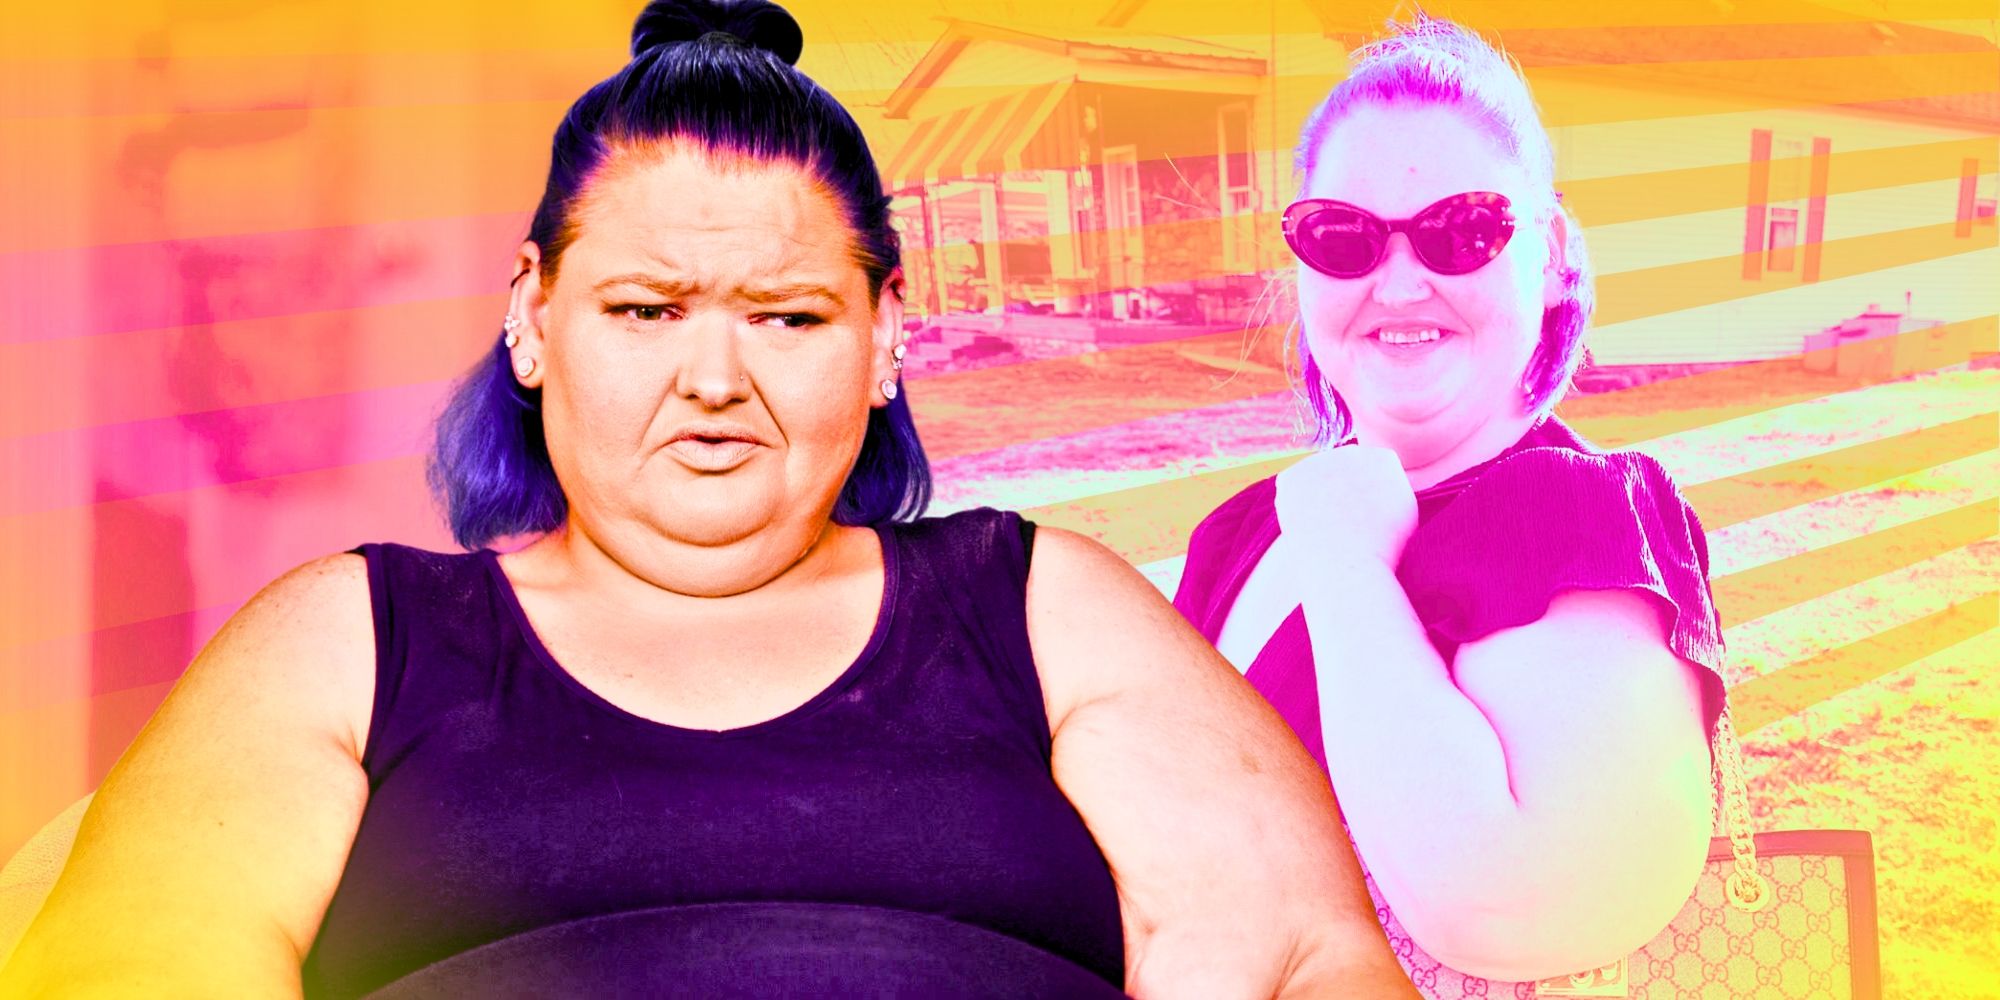 1000-Lb Sisters Amy Slaton montage with a house in the background